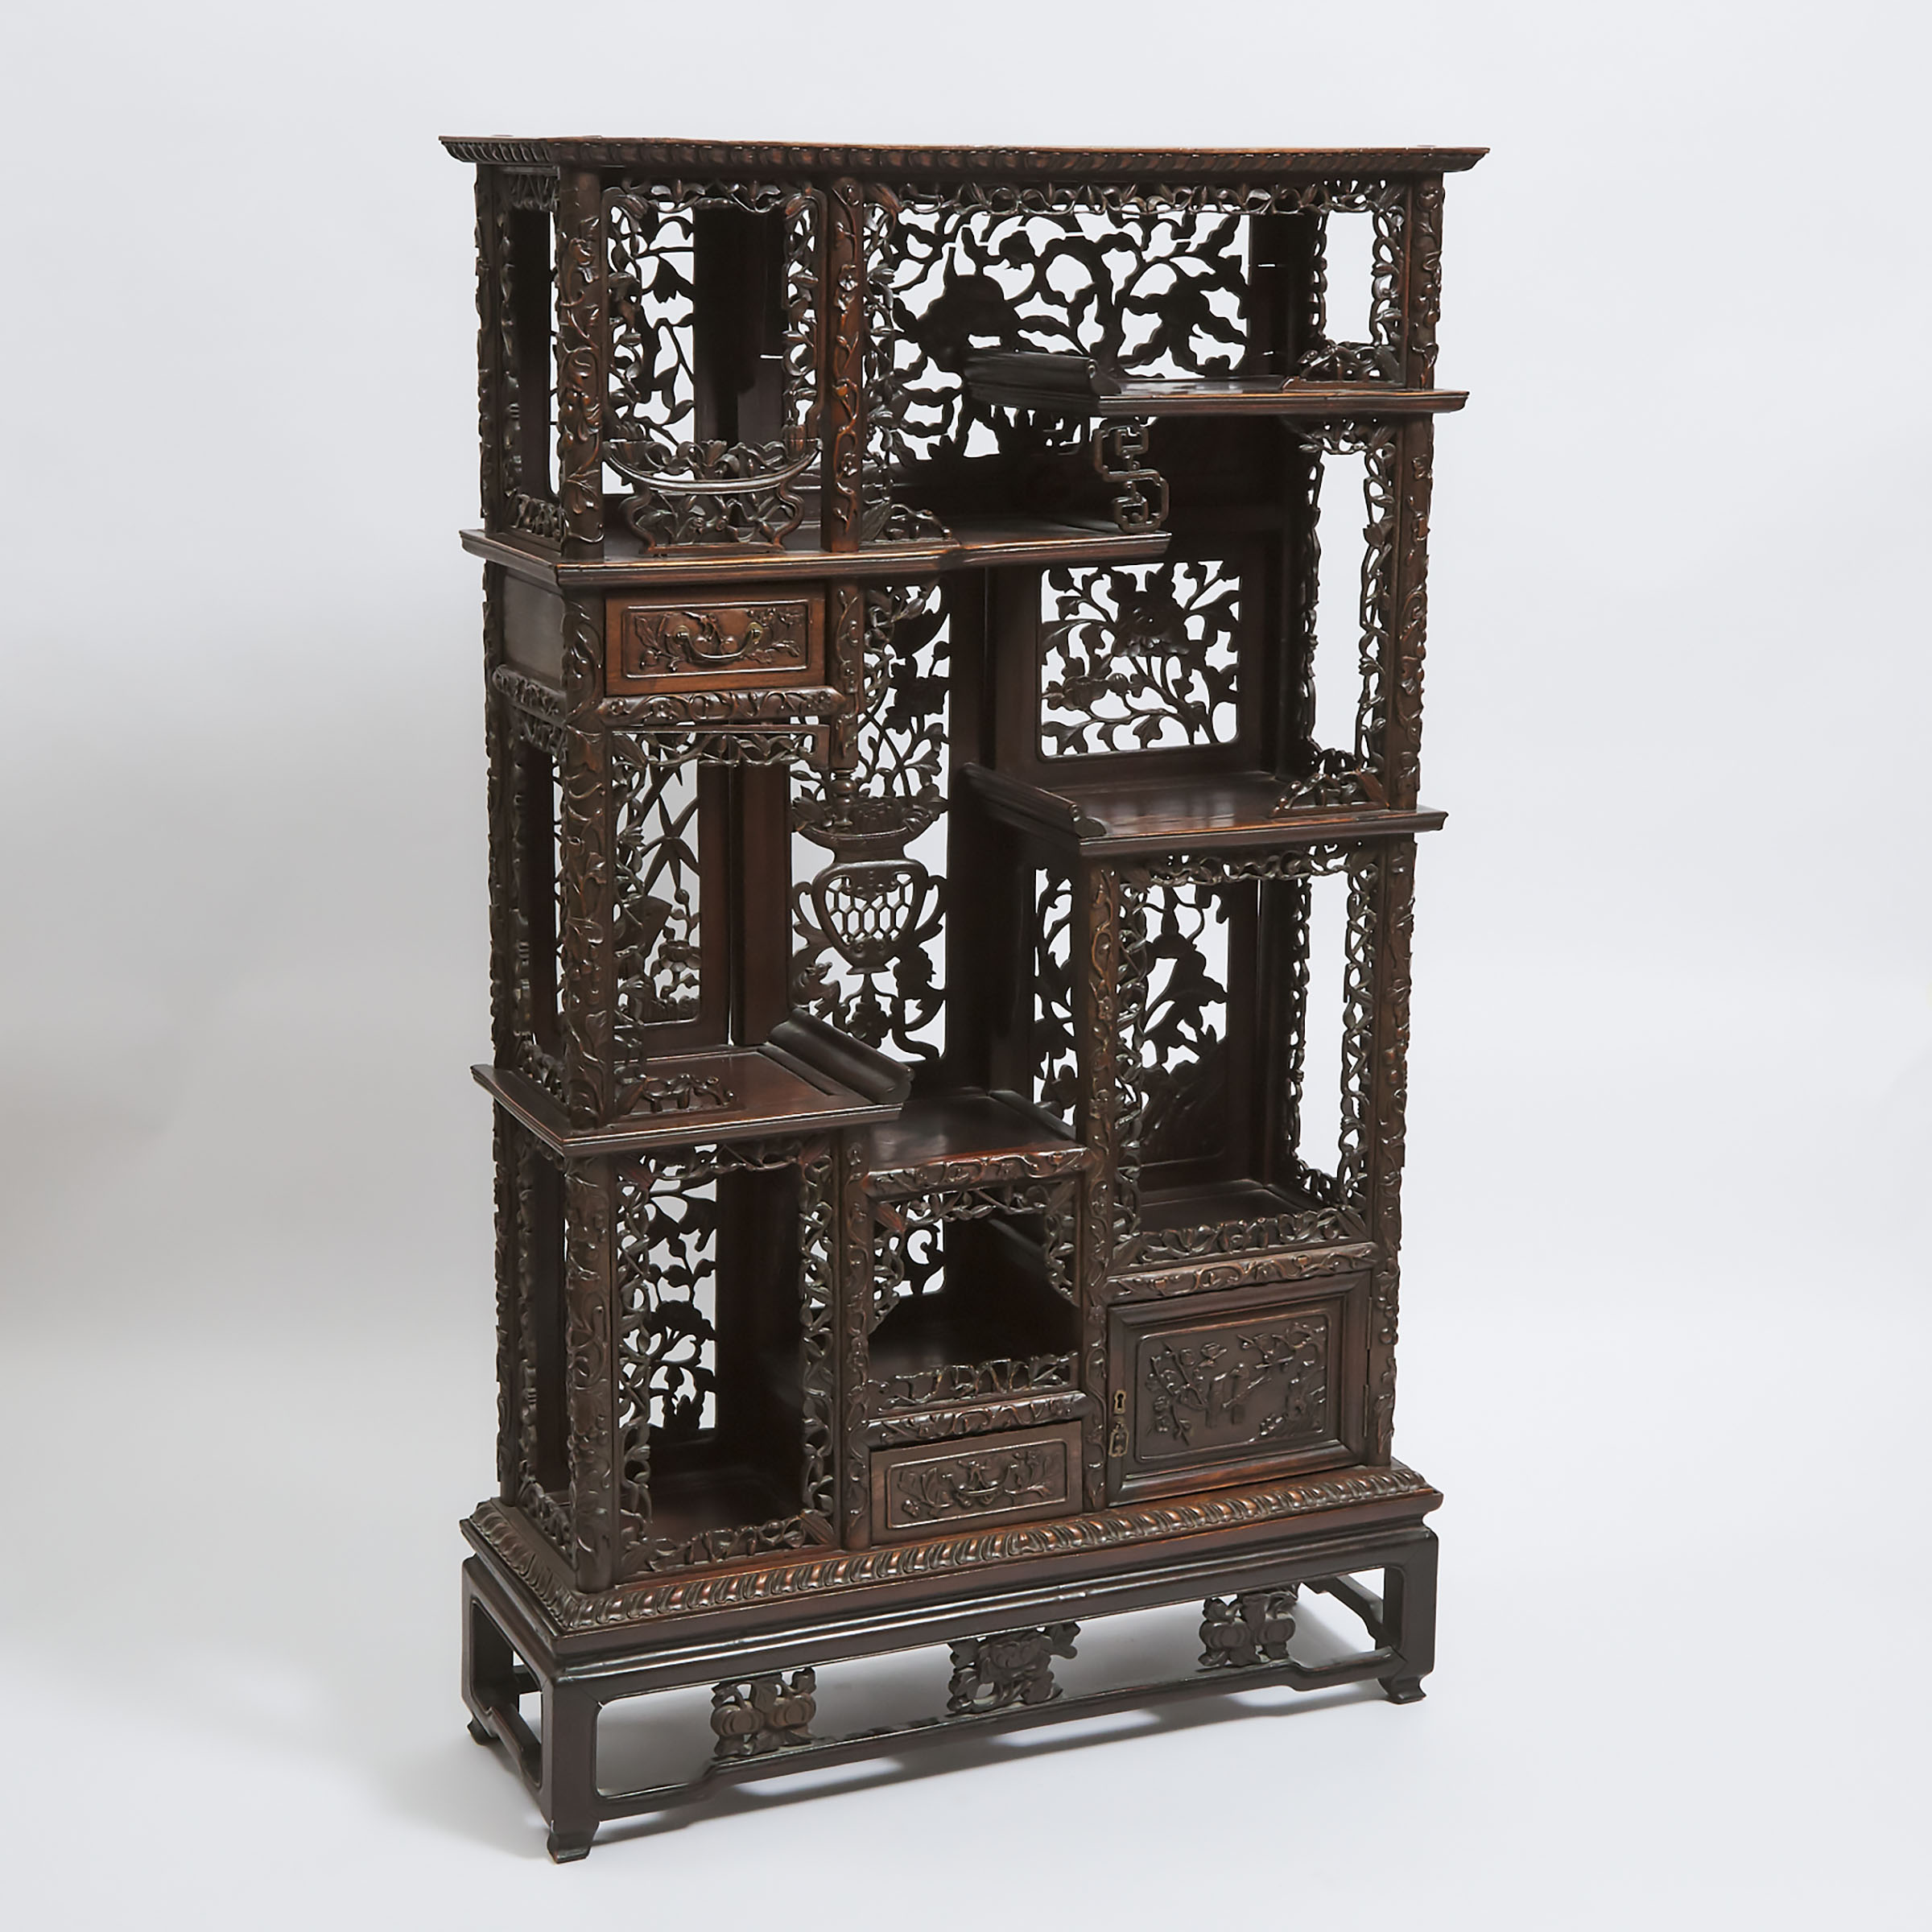 A Chinese Export Carved Rosewood 'Curio' Display Cabinet, Early 20th Century